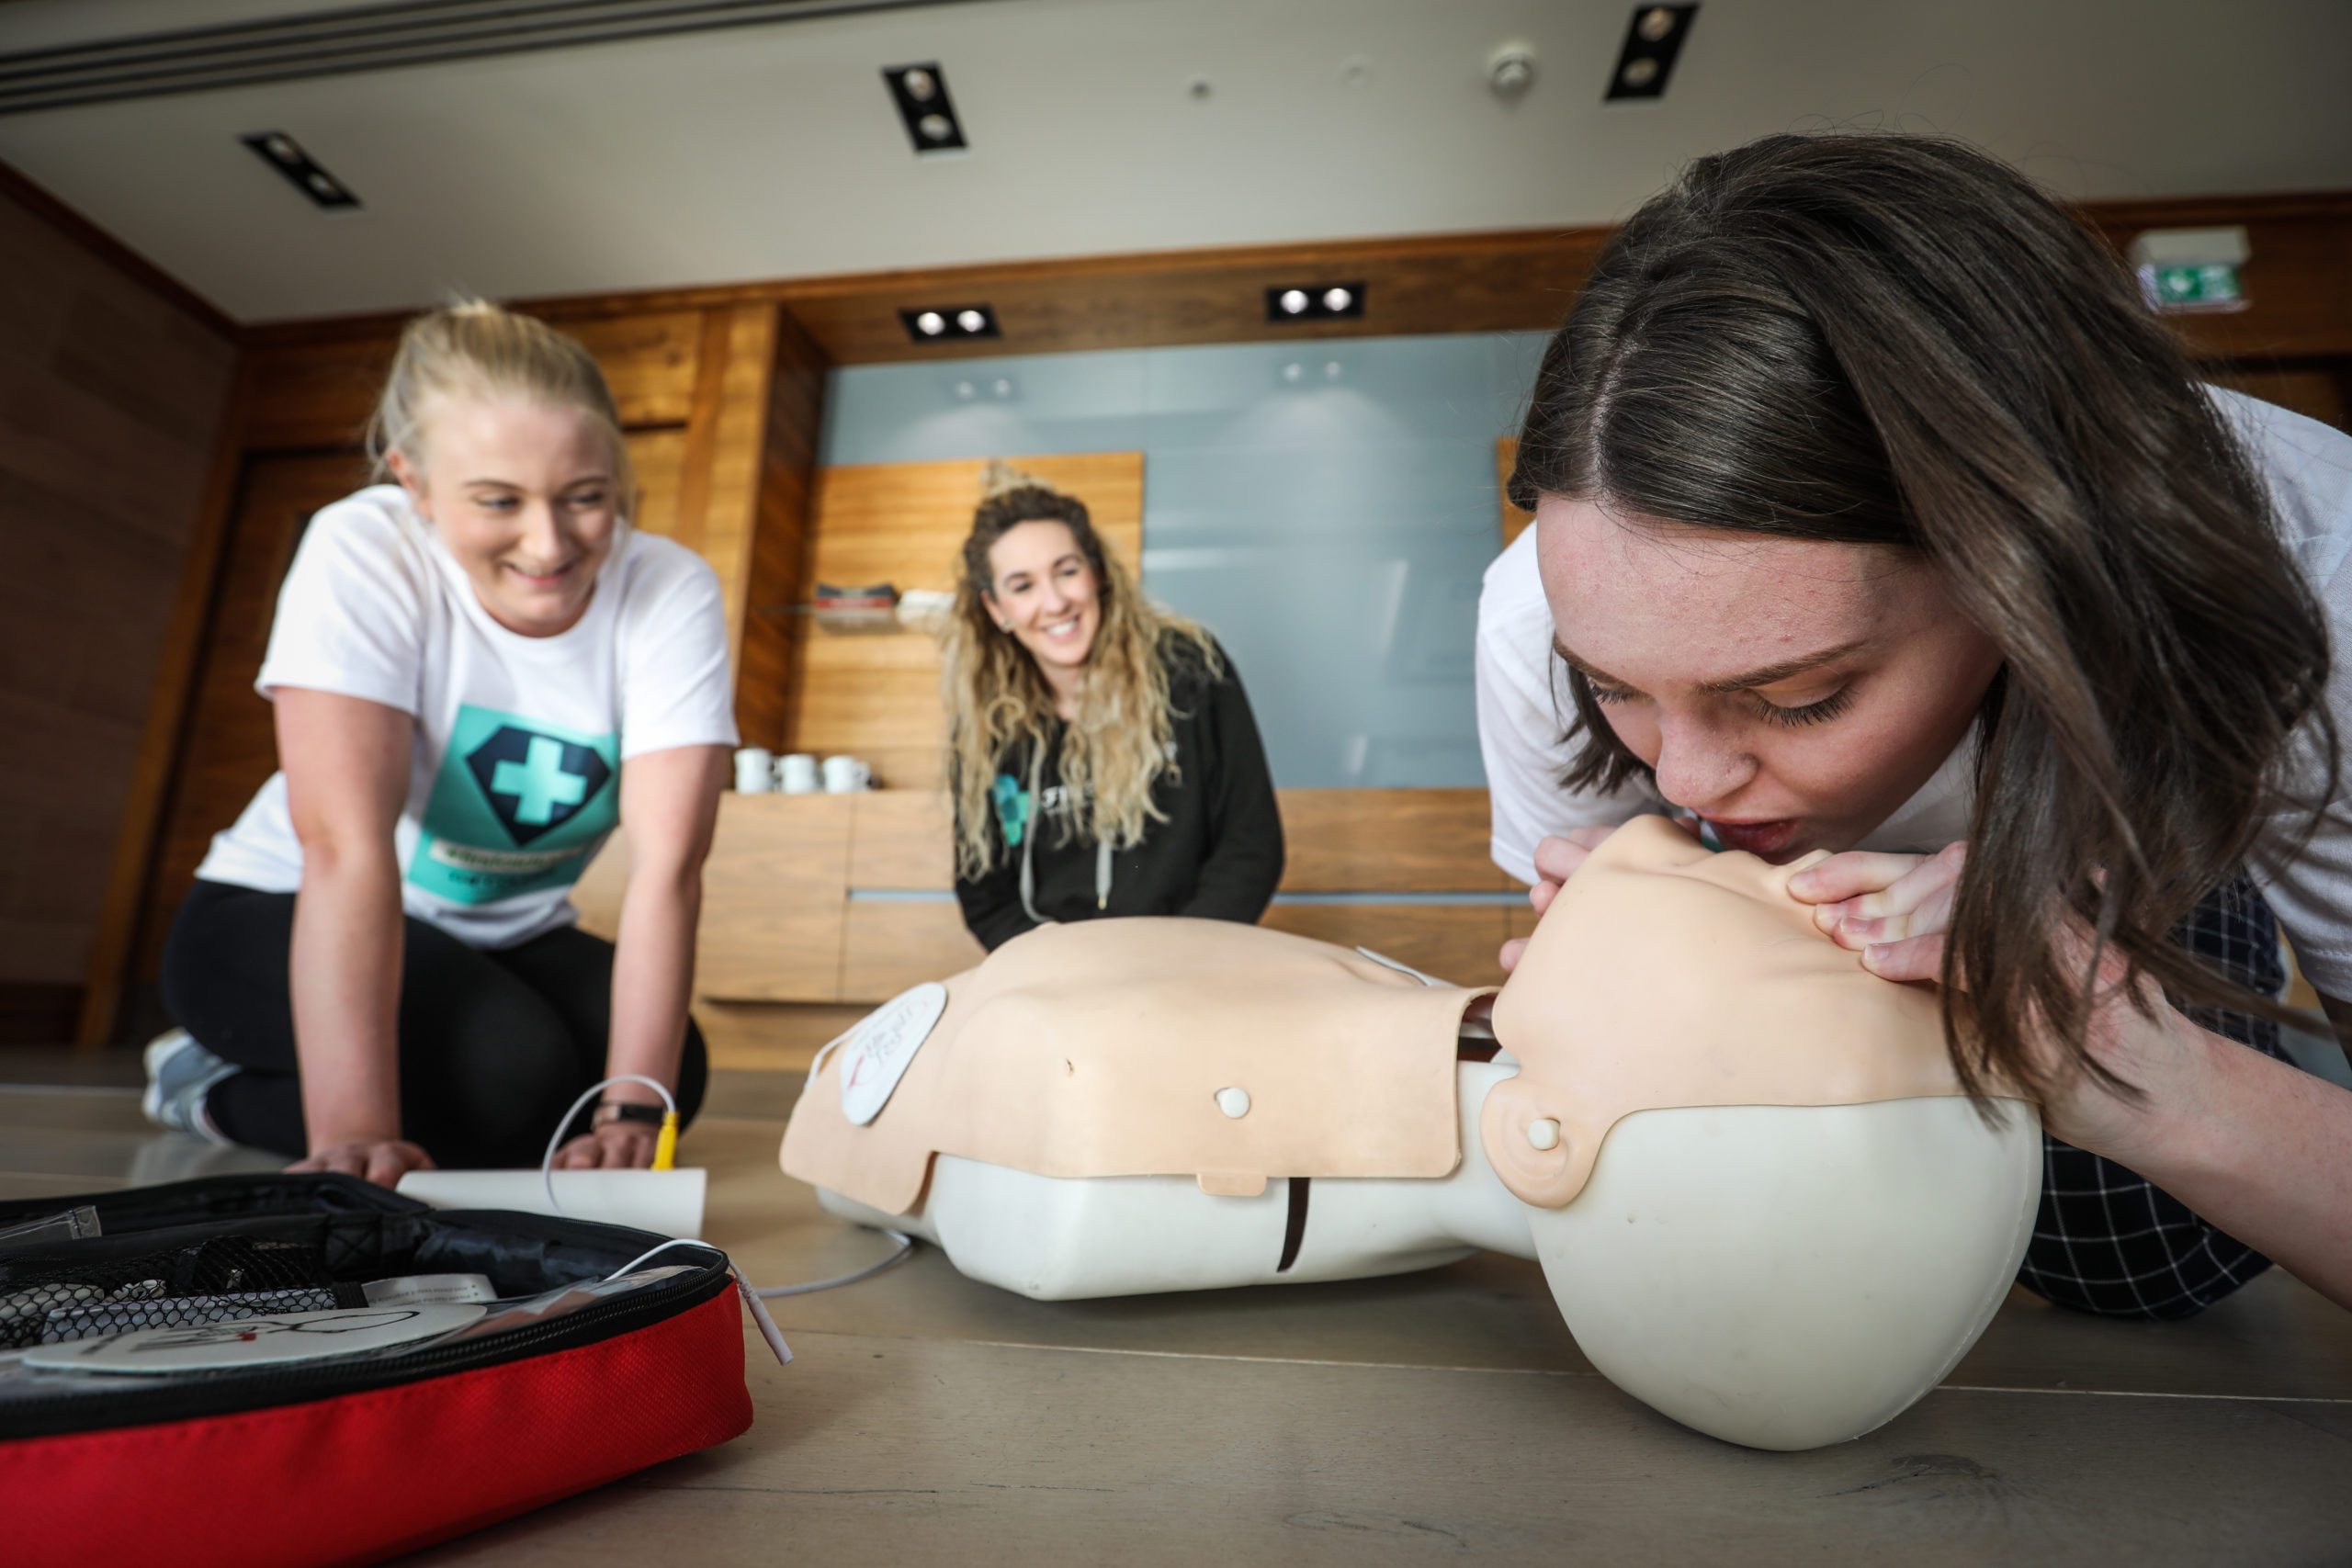 Robyn Duffy runs a series of first aid courses in Tayside and Fife tailored to parents and adults.